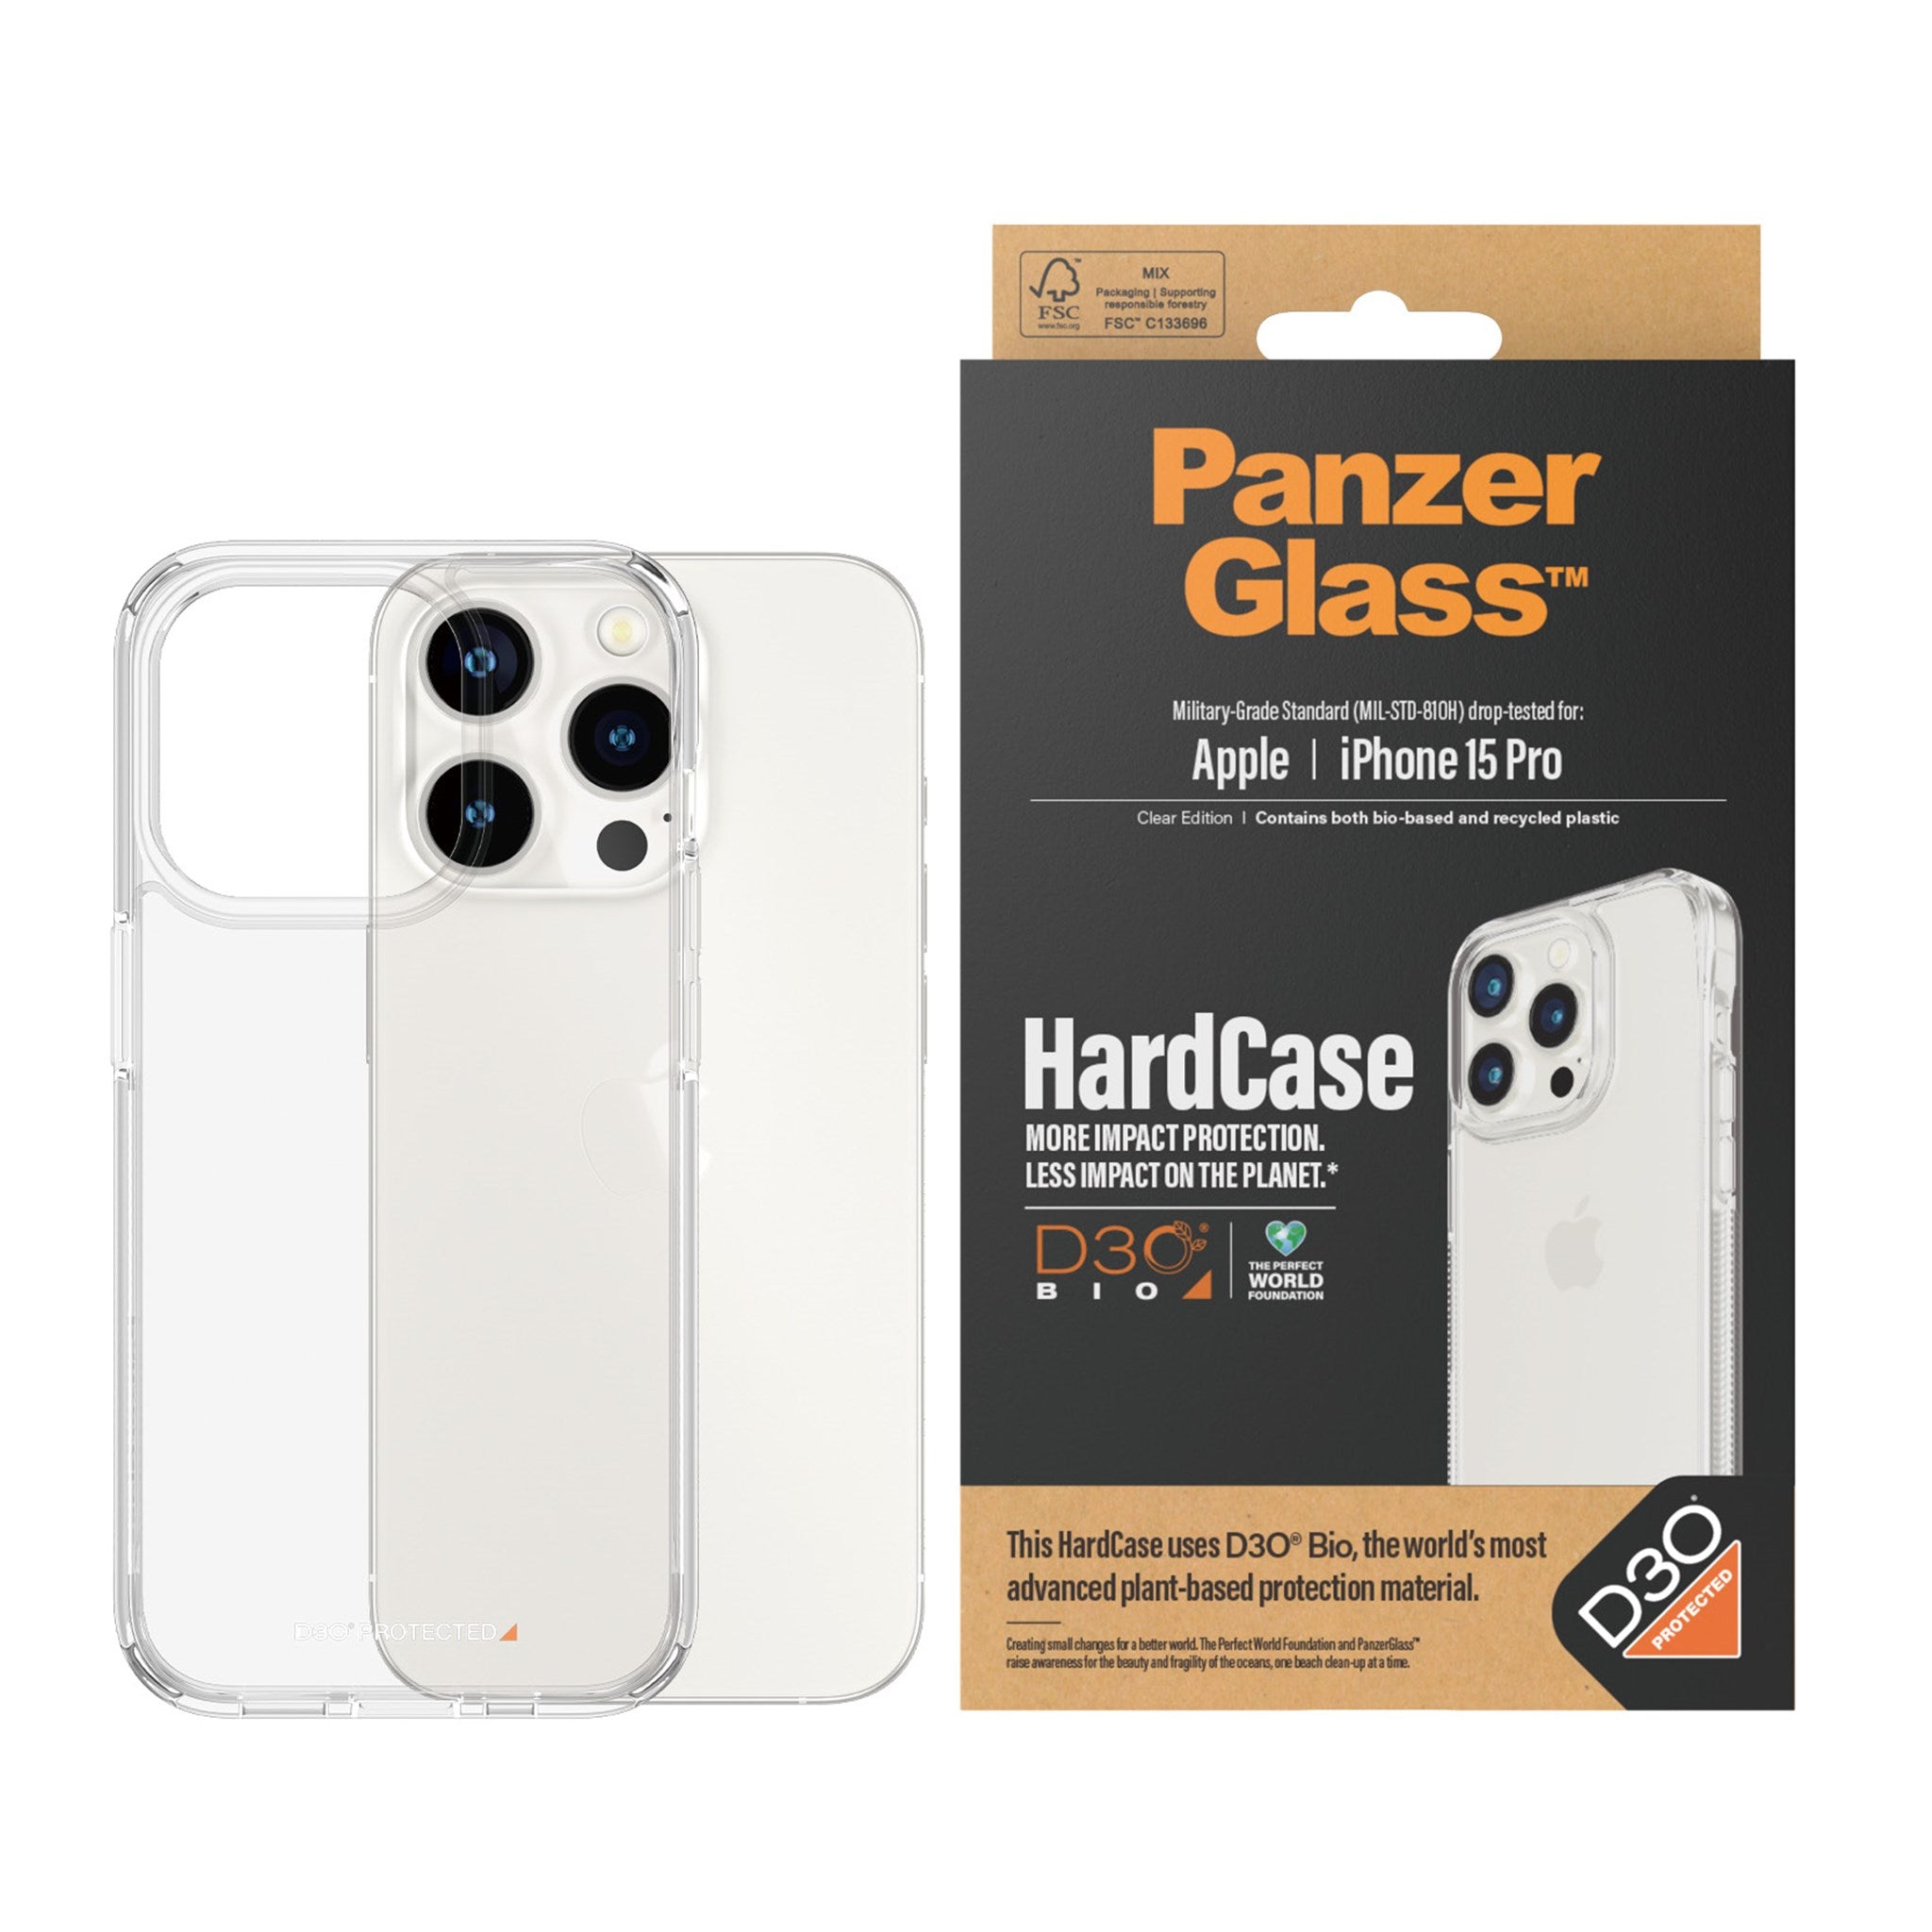 chriskeeb on X: Panzer glass for samsung s22 ultra is trash. I